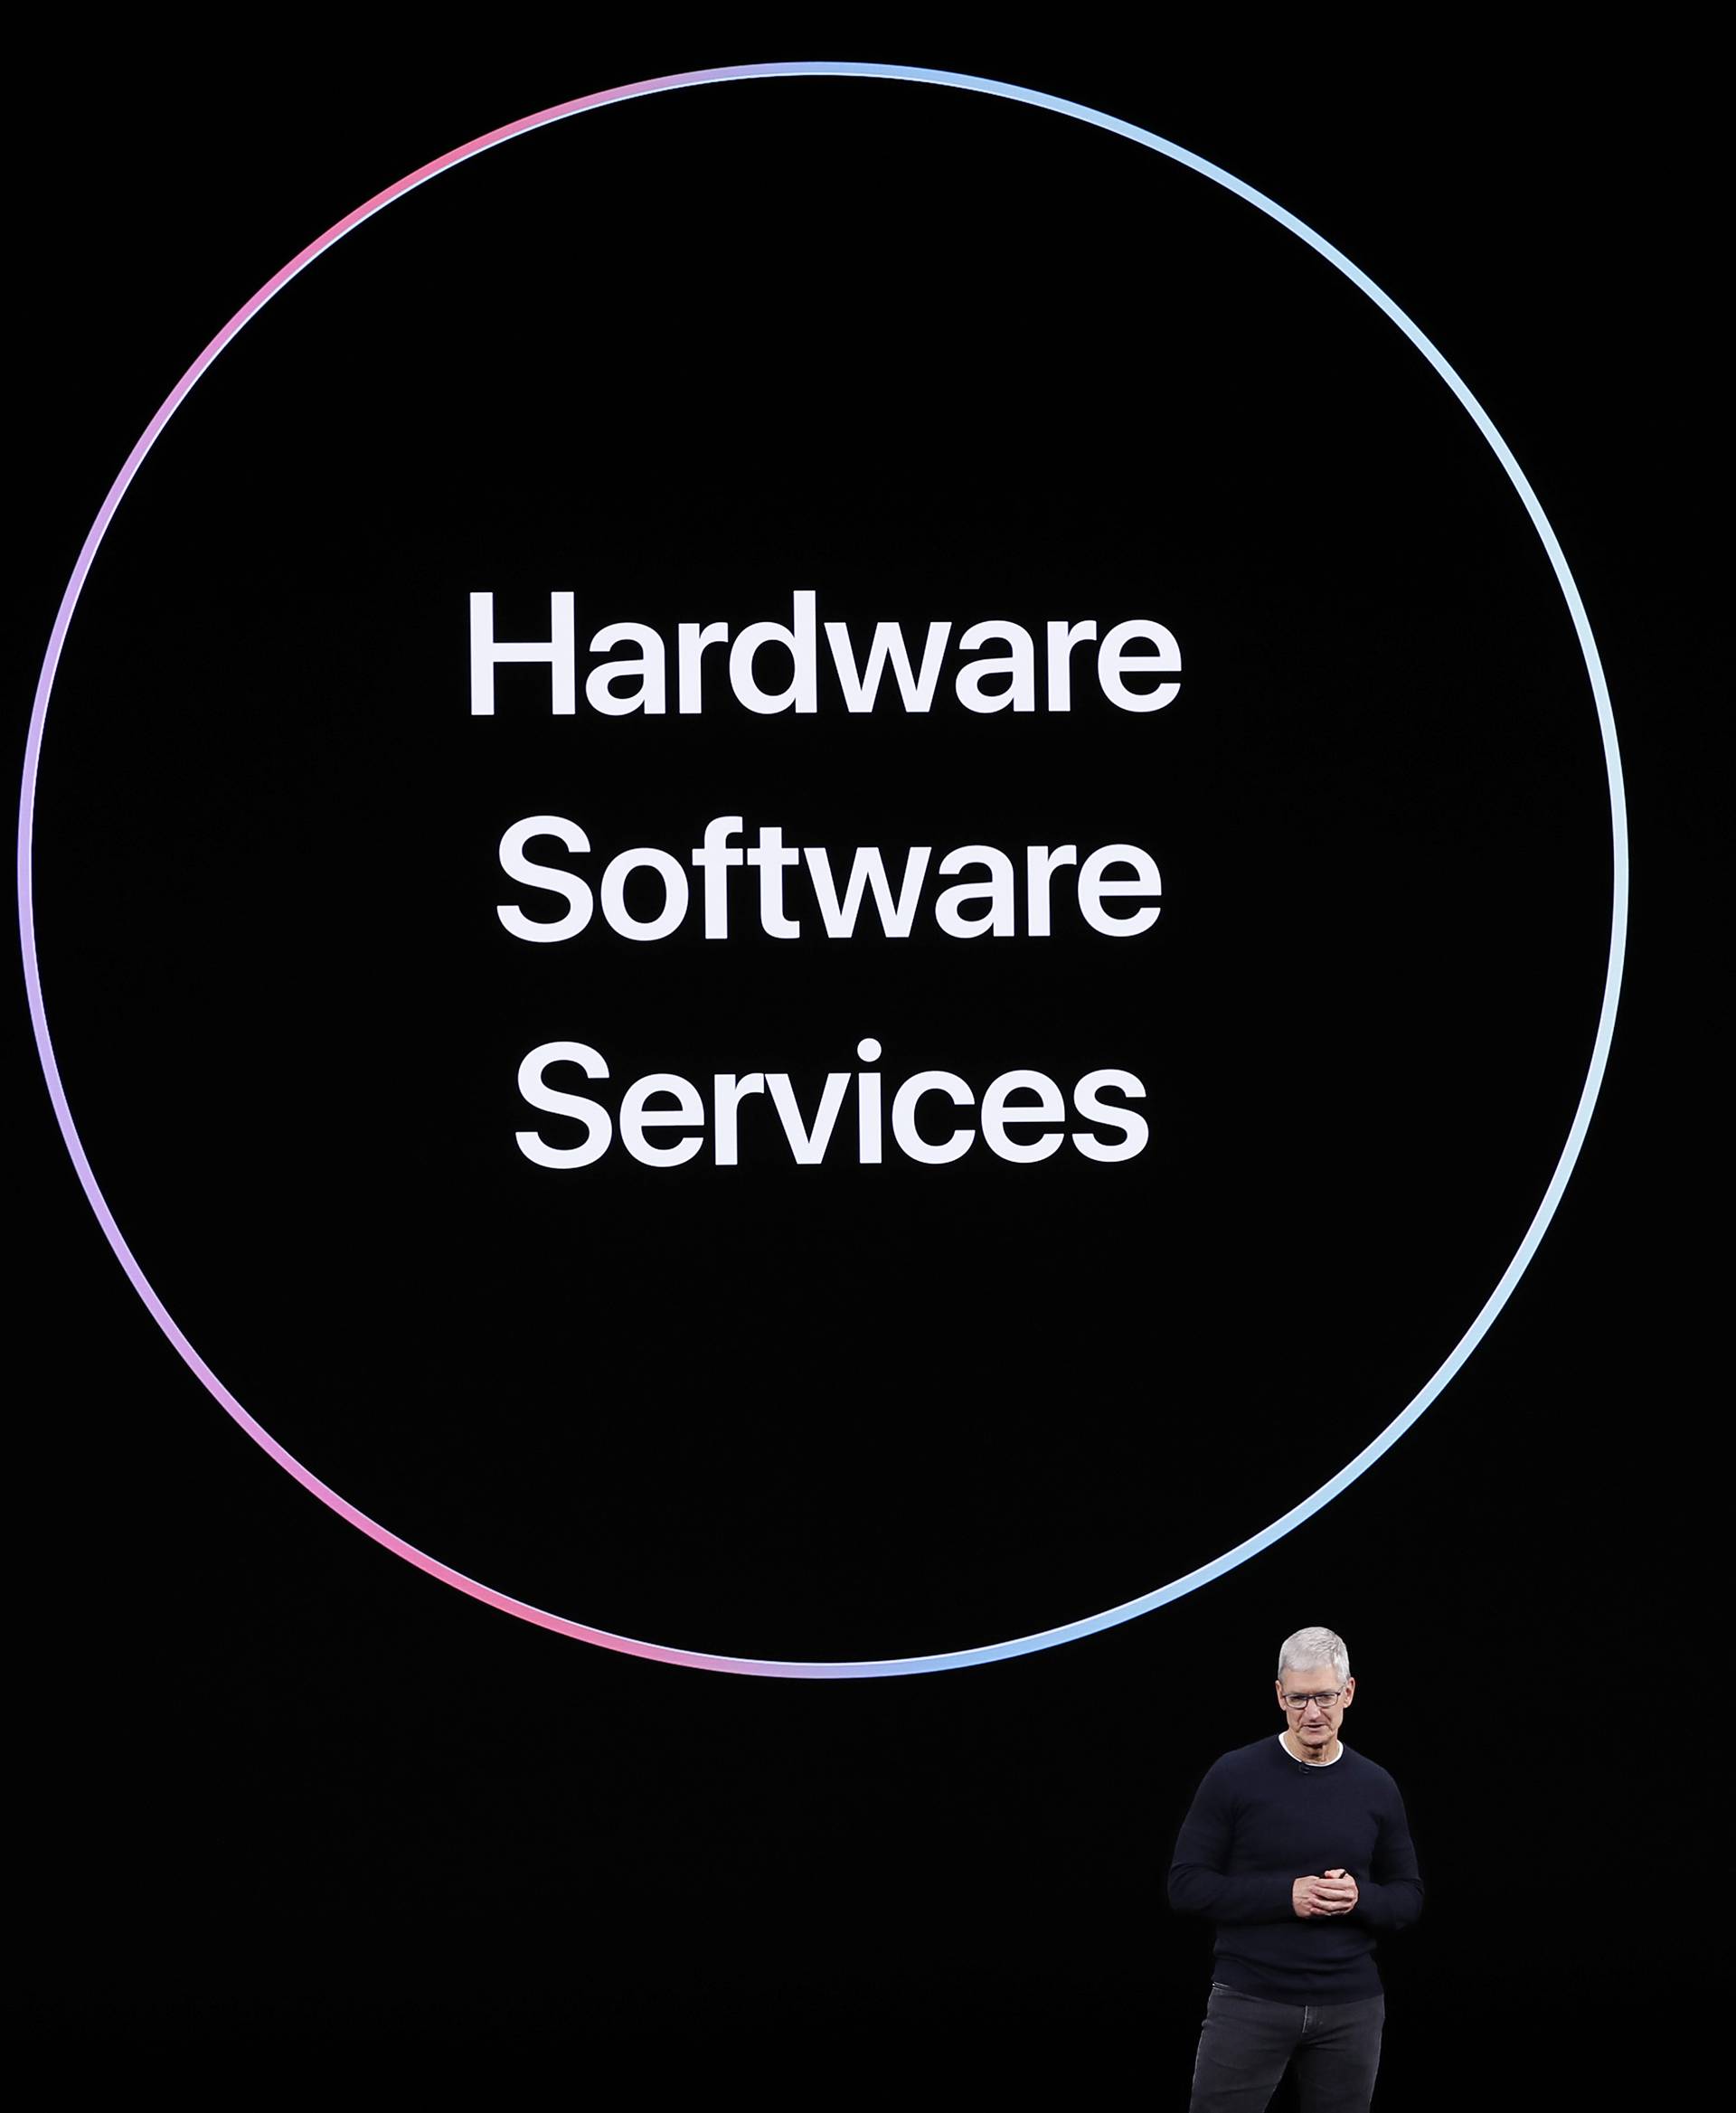 CEO Tim Cook speaks at an Apple event at their headquarters in Cupertino